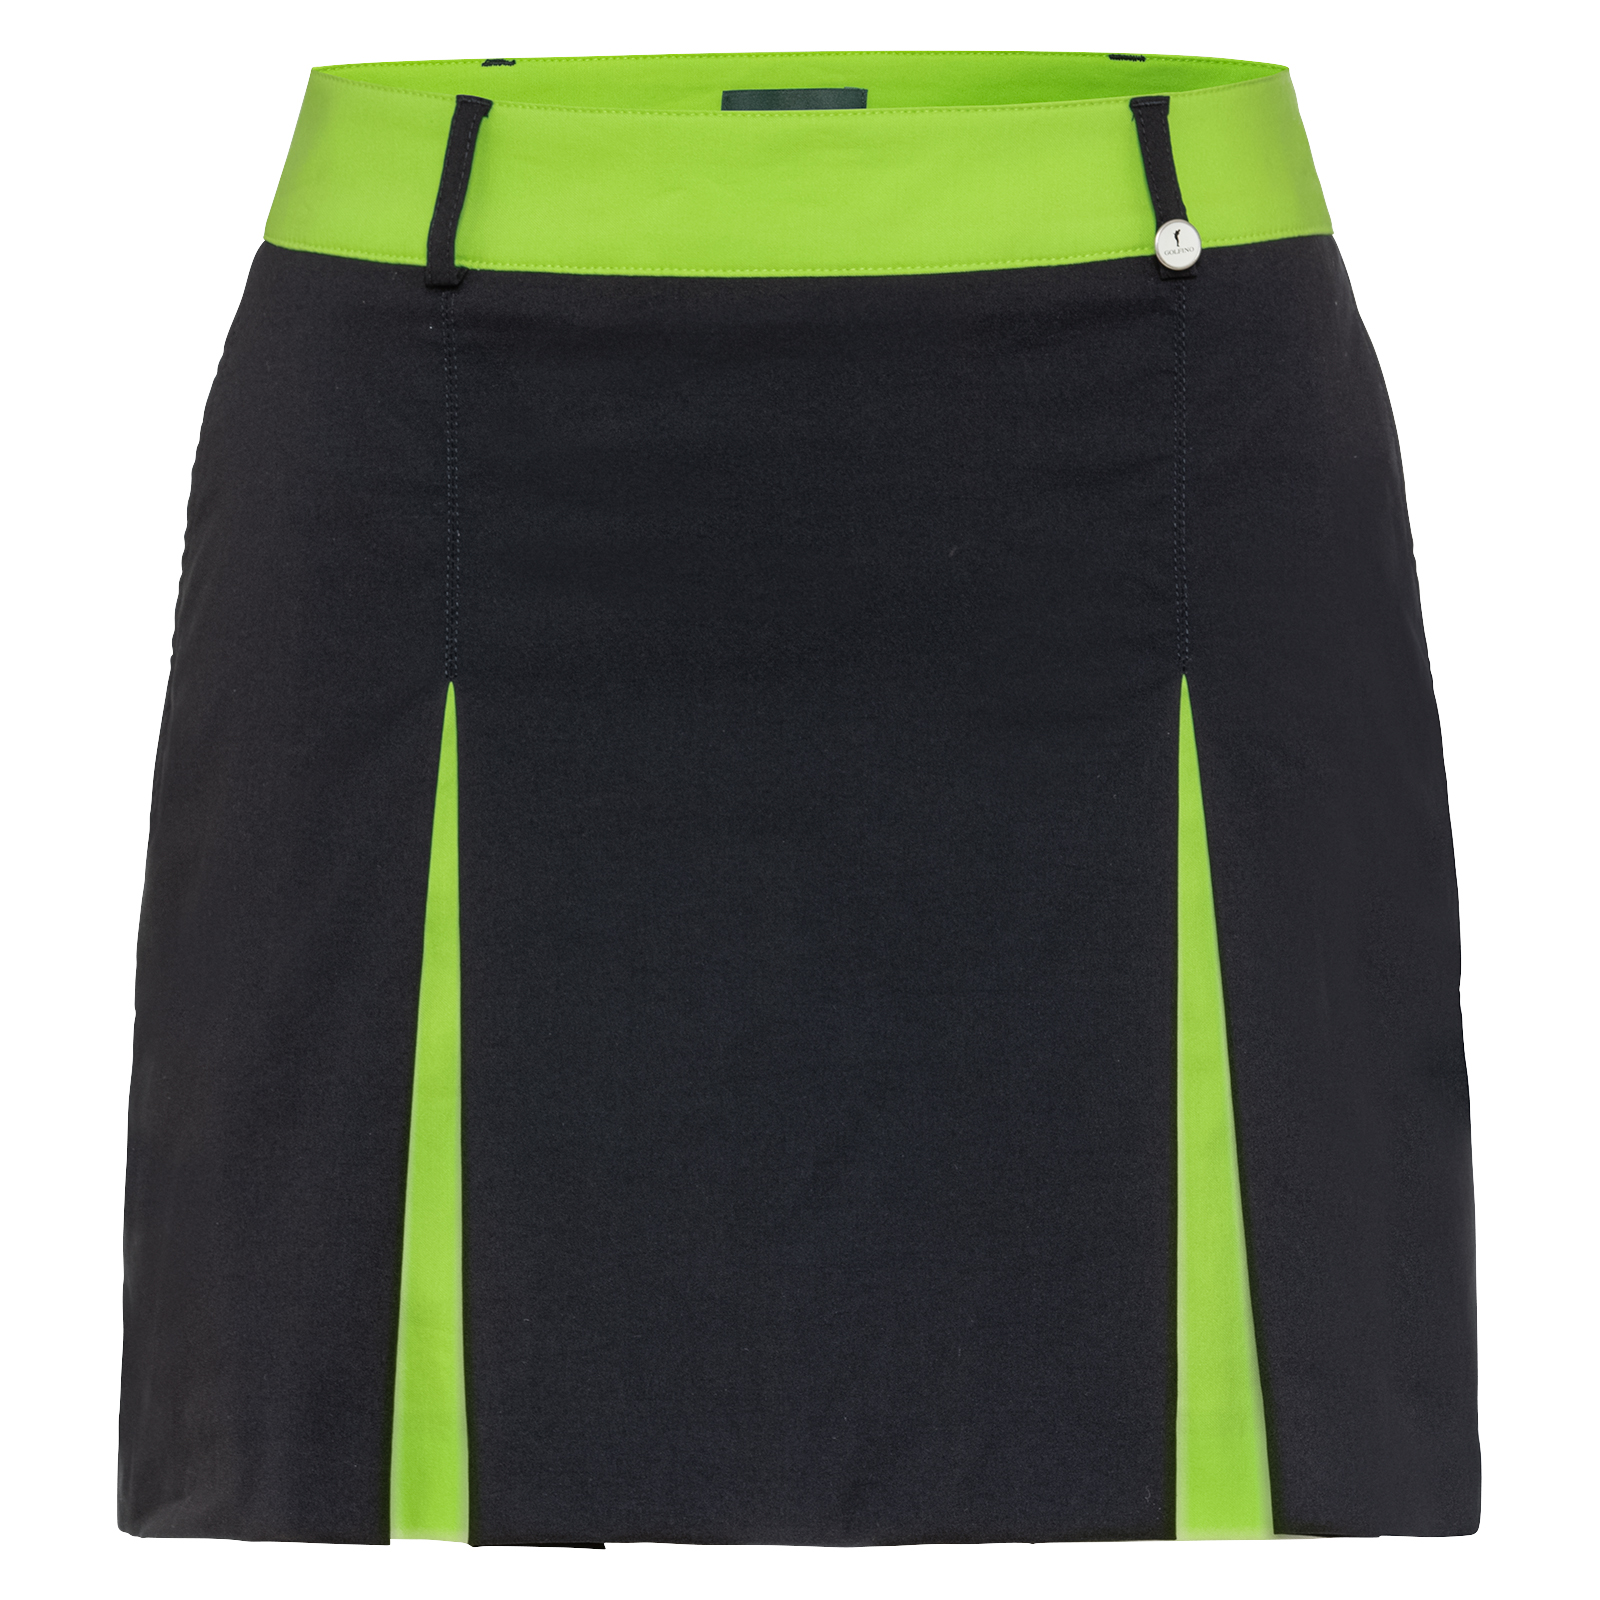 Ladies' pro-style short golf skort with UV protection 